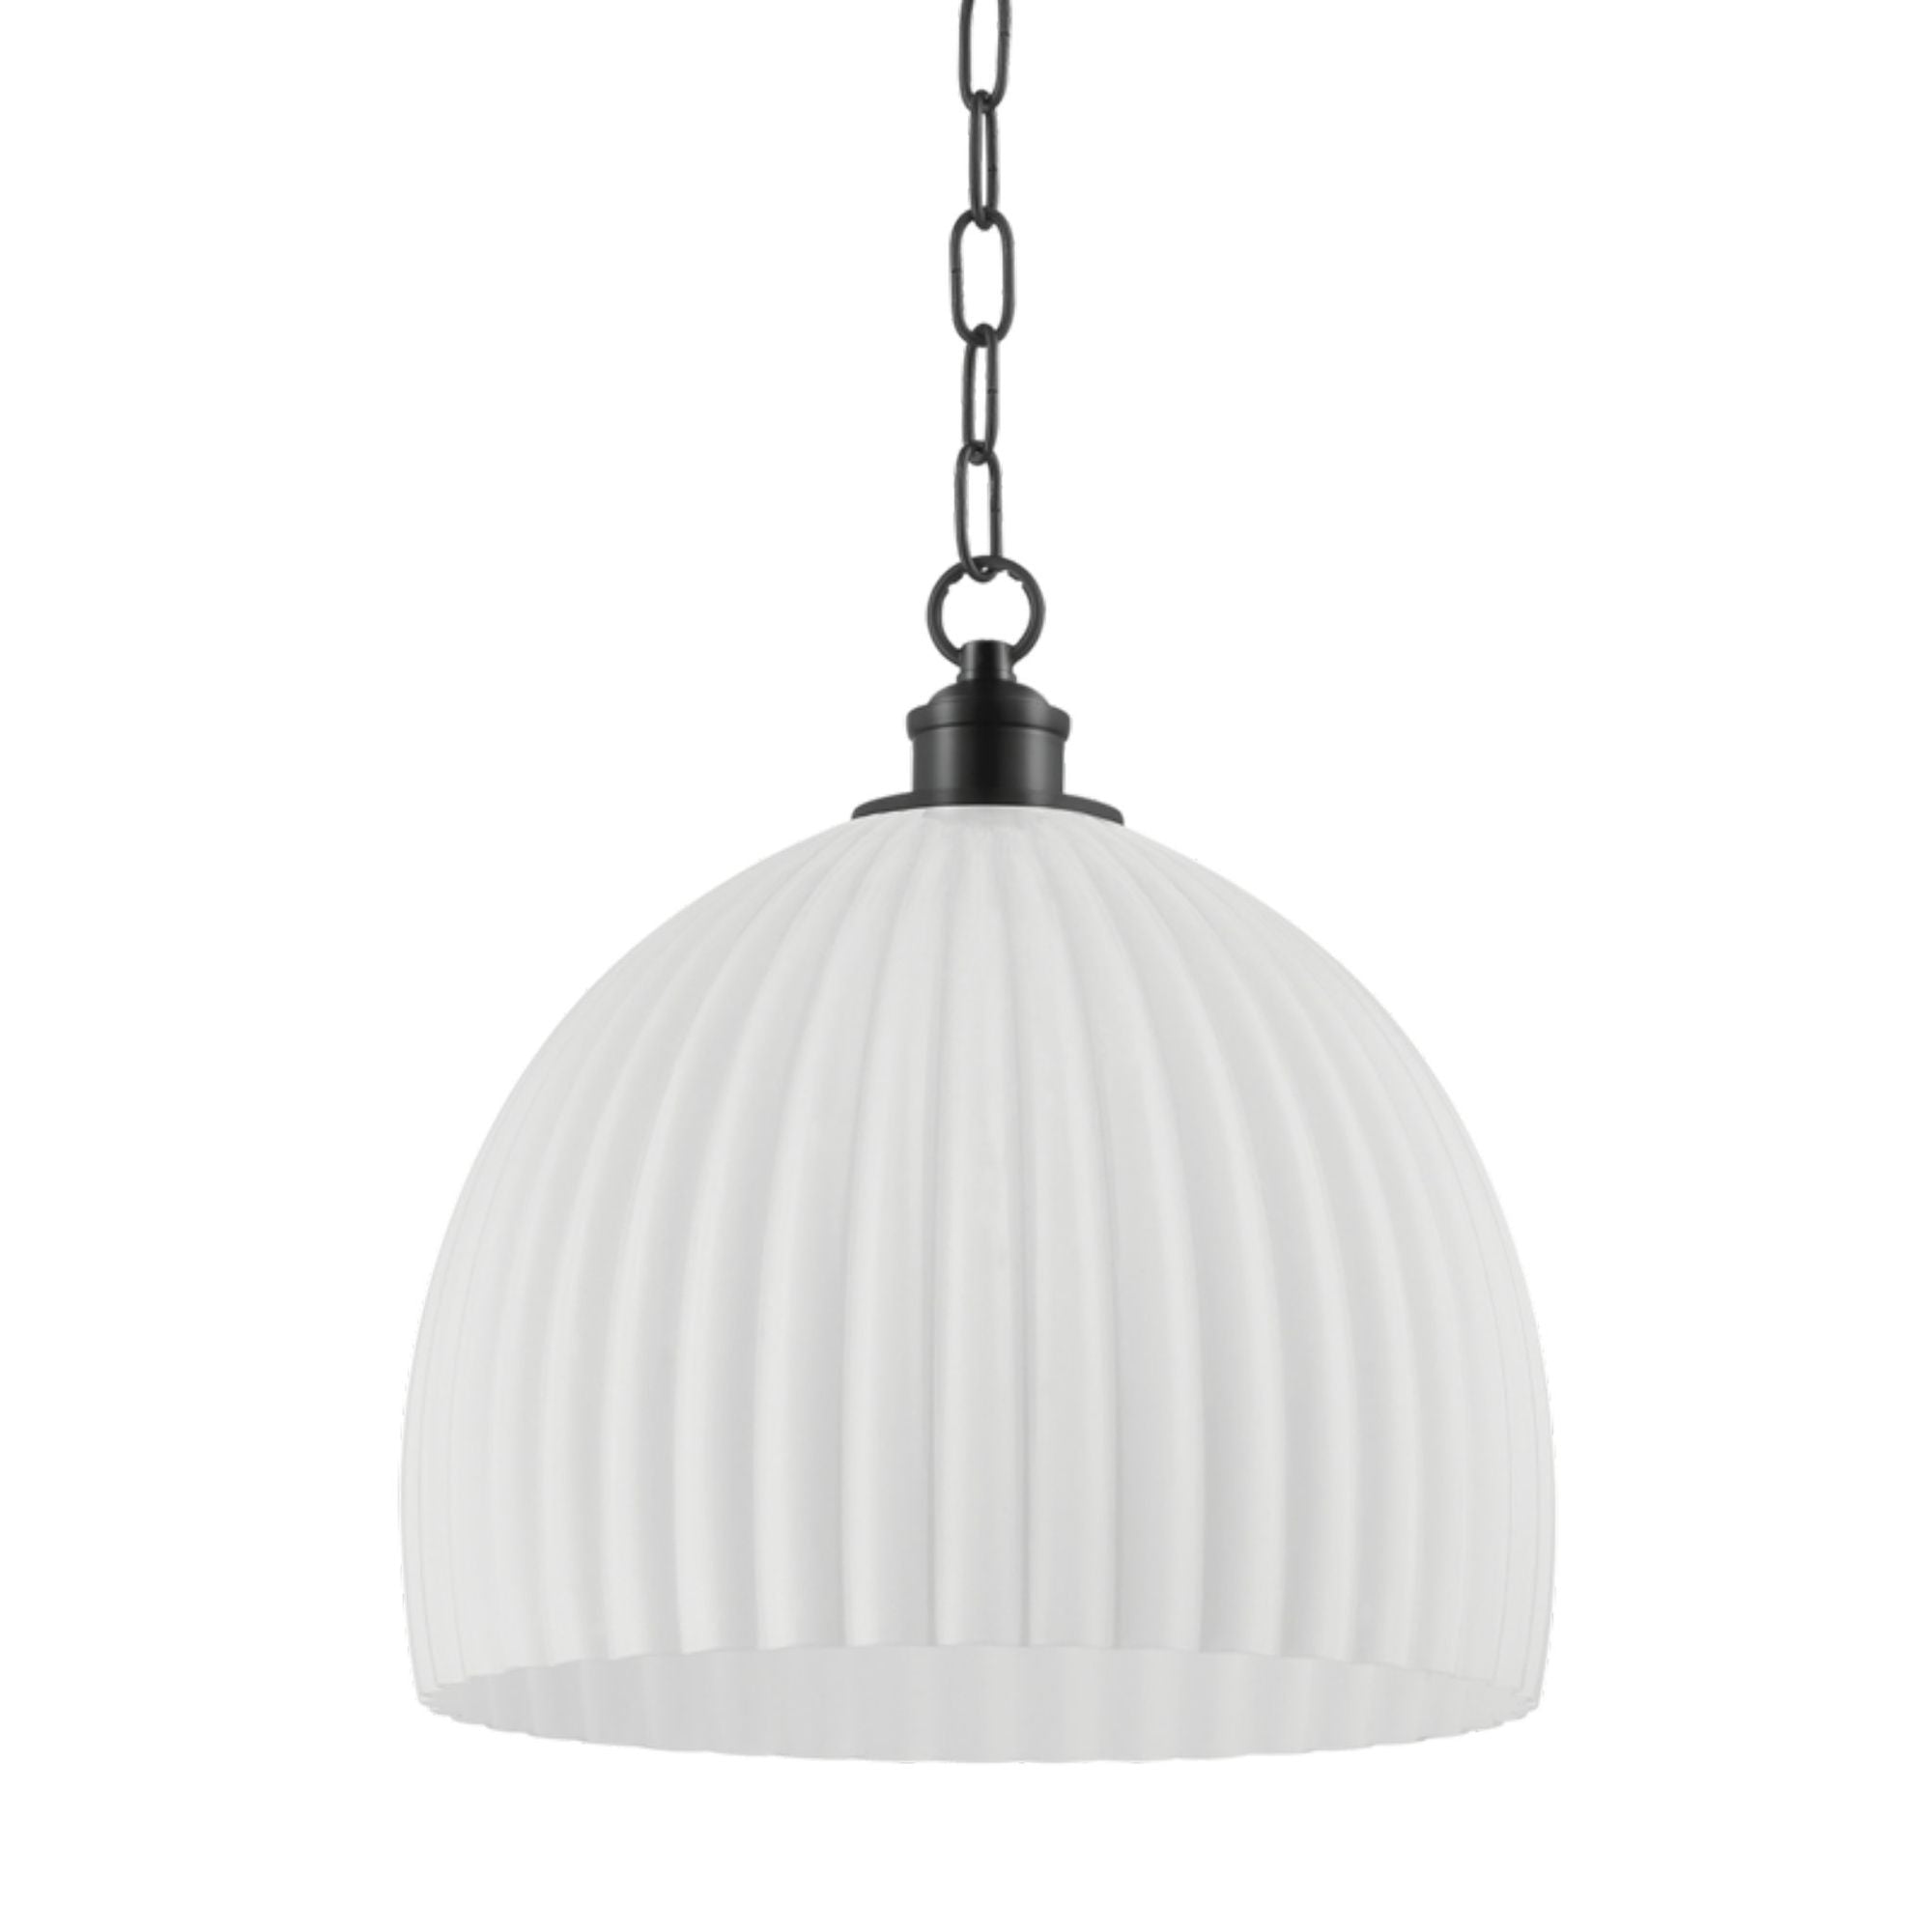 Hillary 1-Light Pendant in Old Bronze by Zio & Sons